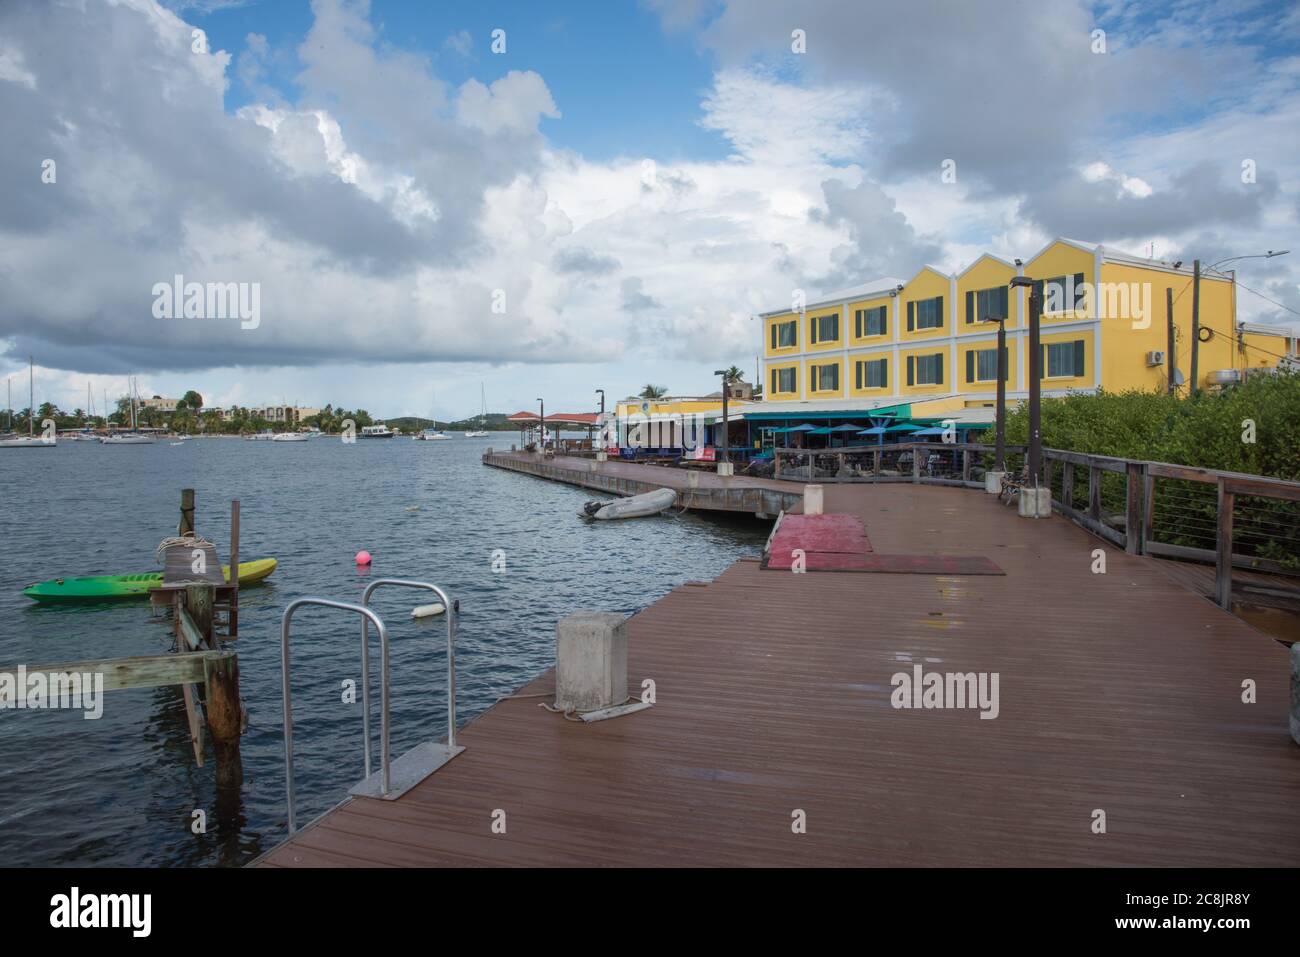 Christiansted, St. Croix, VI-October 19,2019: Boardwalk with view of harbor vessels and Rum Runners Restaurant in St. Croix in the USVI Stock Photo